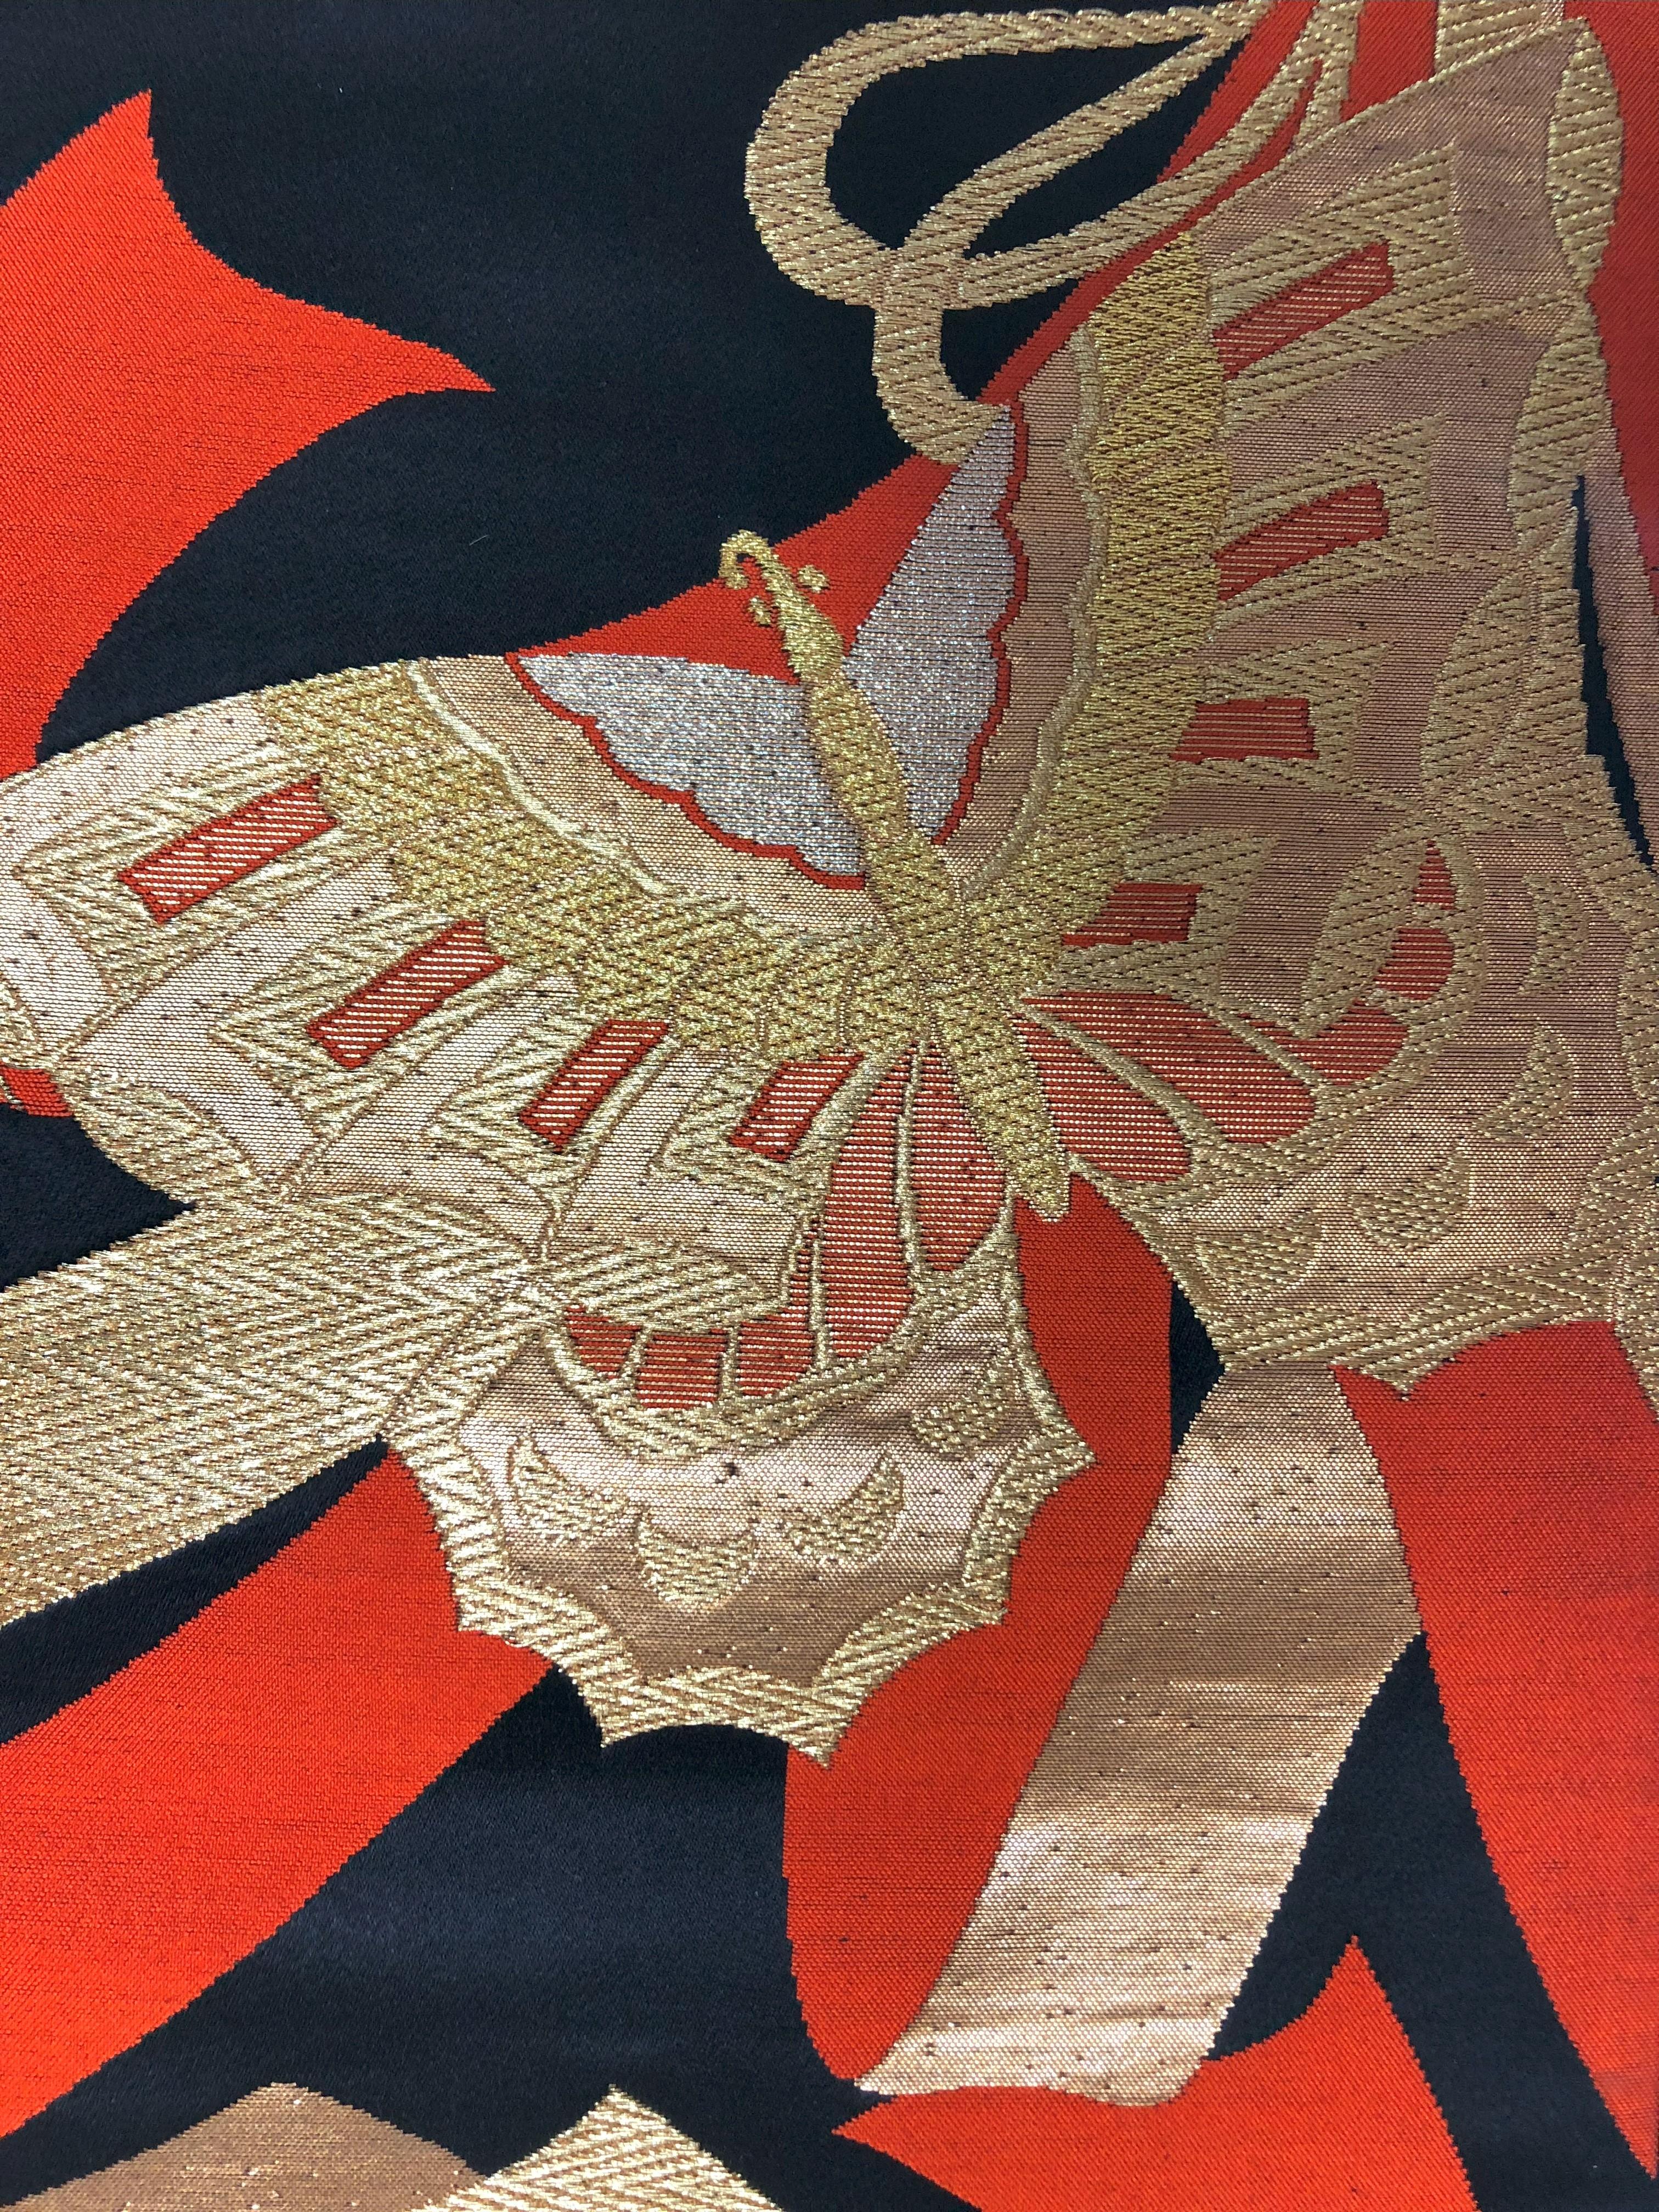 Butterfly of Fortune by Kimono-Couture

*Japanese Kimono Art
*Handmade by Kimono-Couture
*One-of-a-kind Japanese Art

The kimono obi features three butterflies adorned with lavish use of gold threads, gold leaf, and silver leaf. 
In Japan,